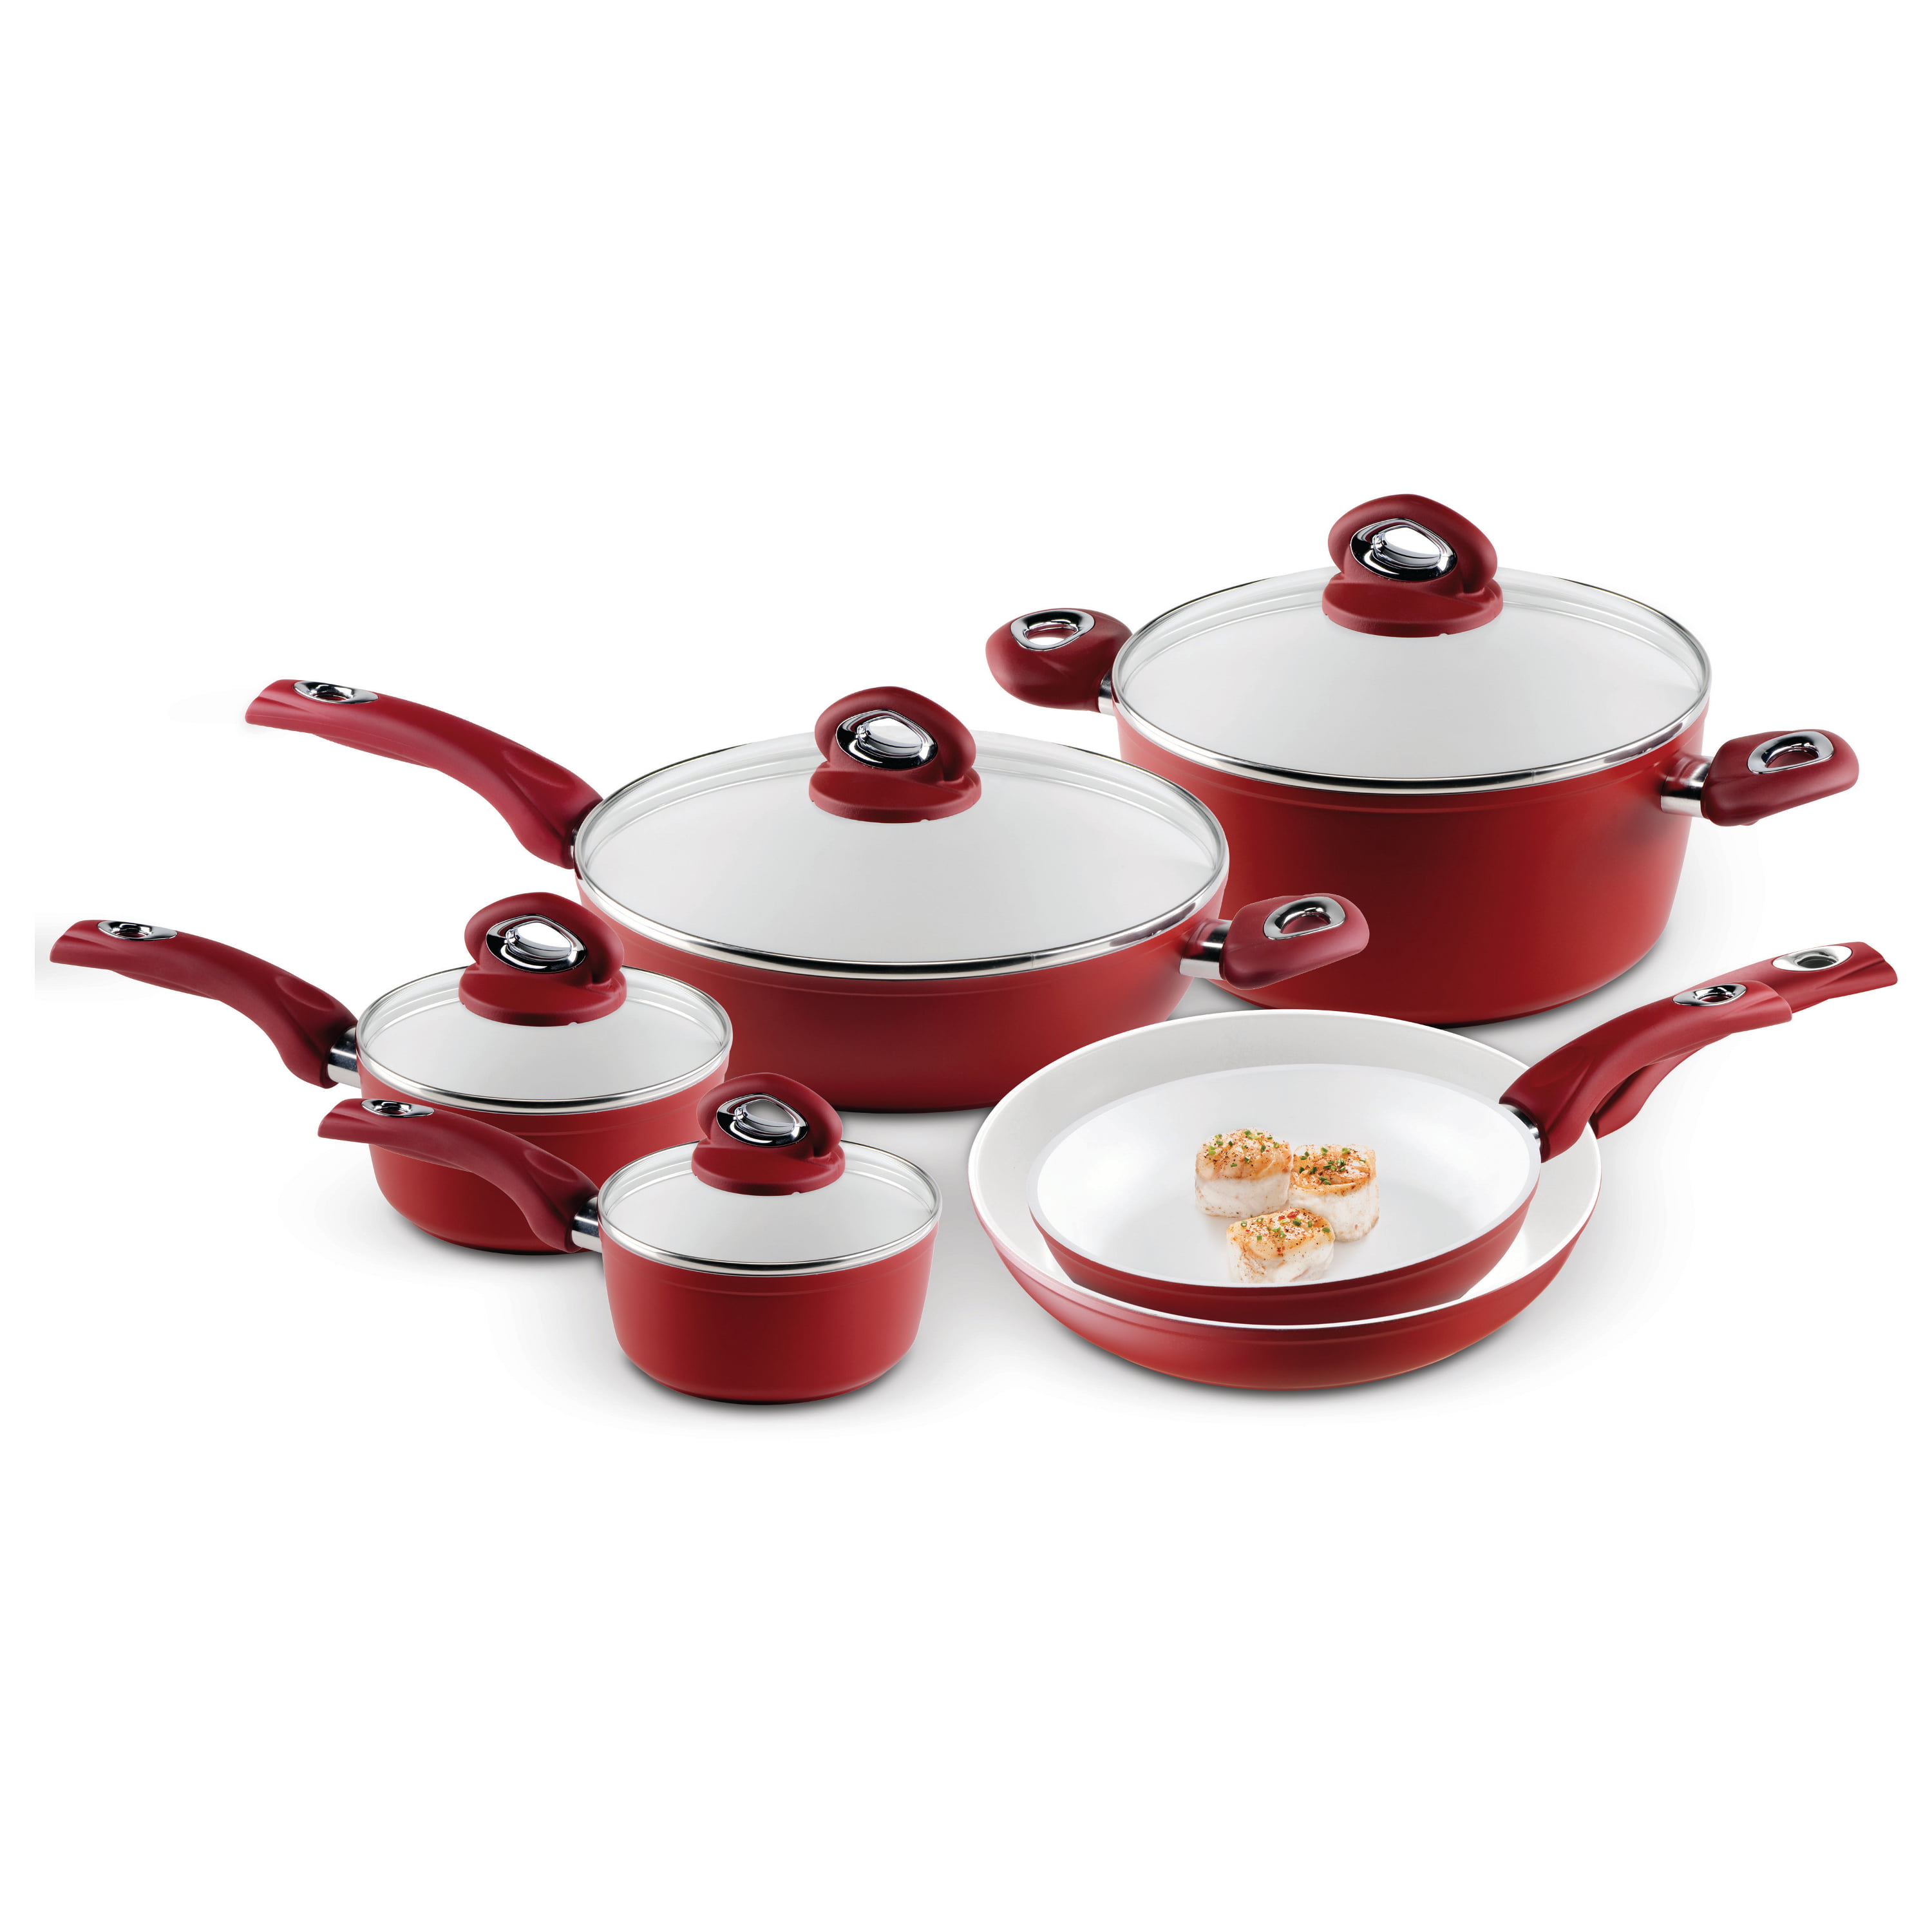 Bialetti 14-Piece Italian Cookware Set – KANREM STORES NG